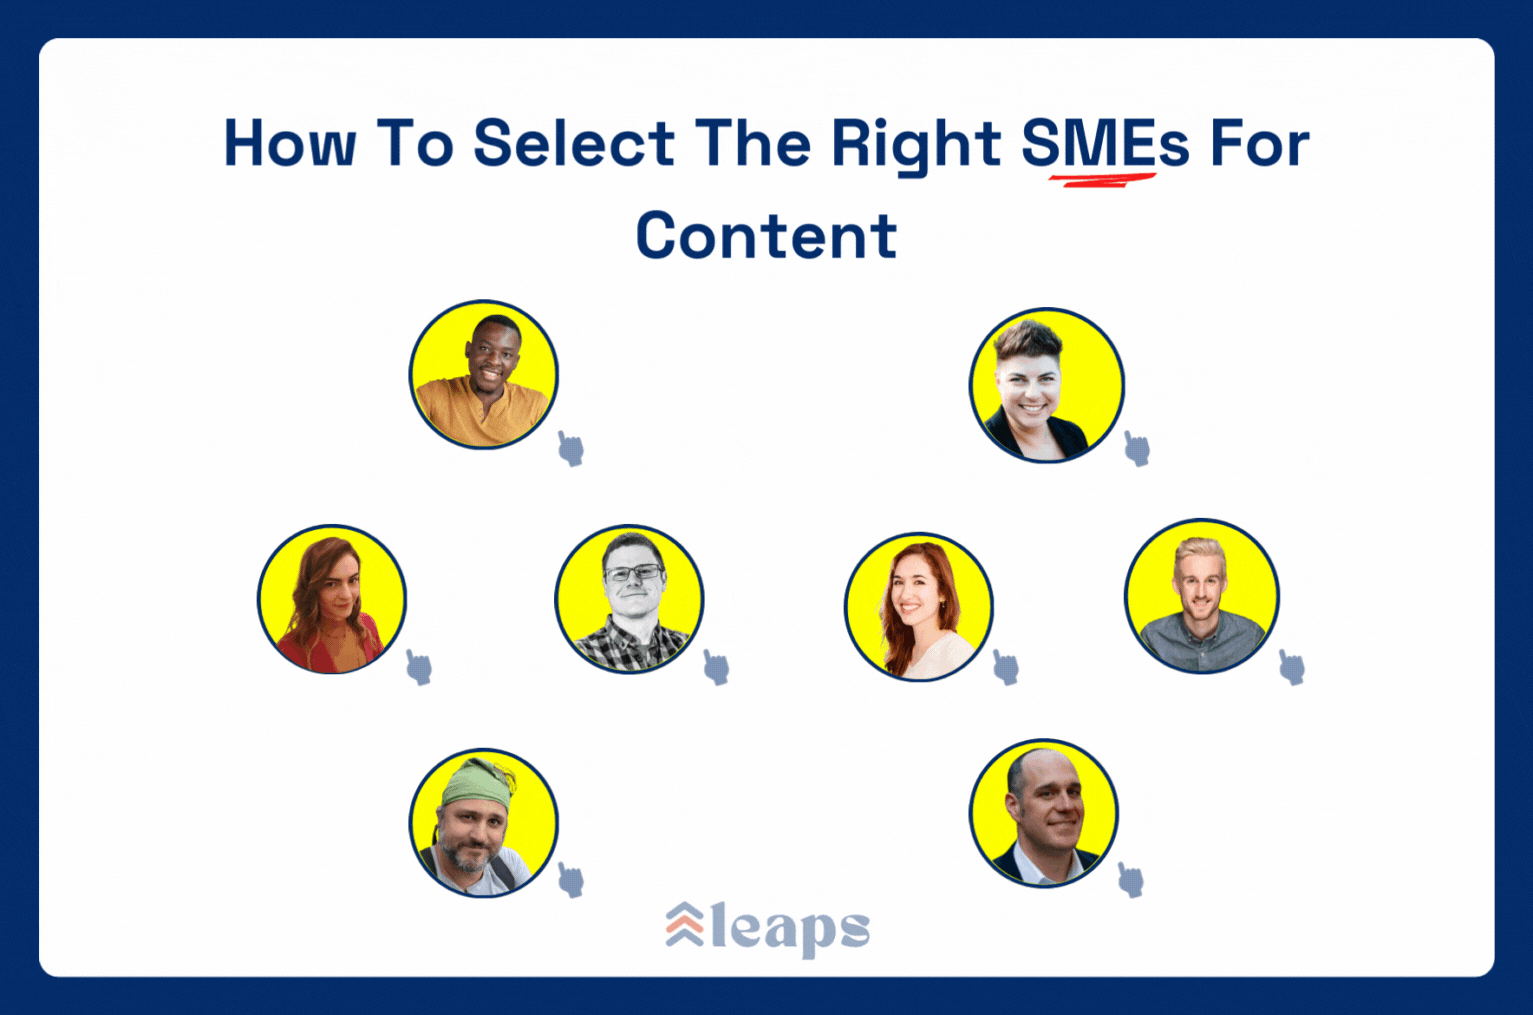 How To Select The Right SMEs For Content